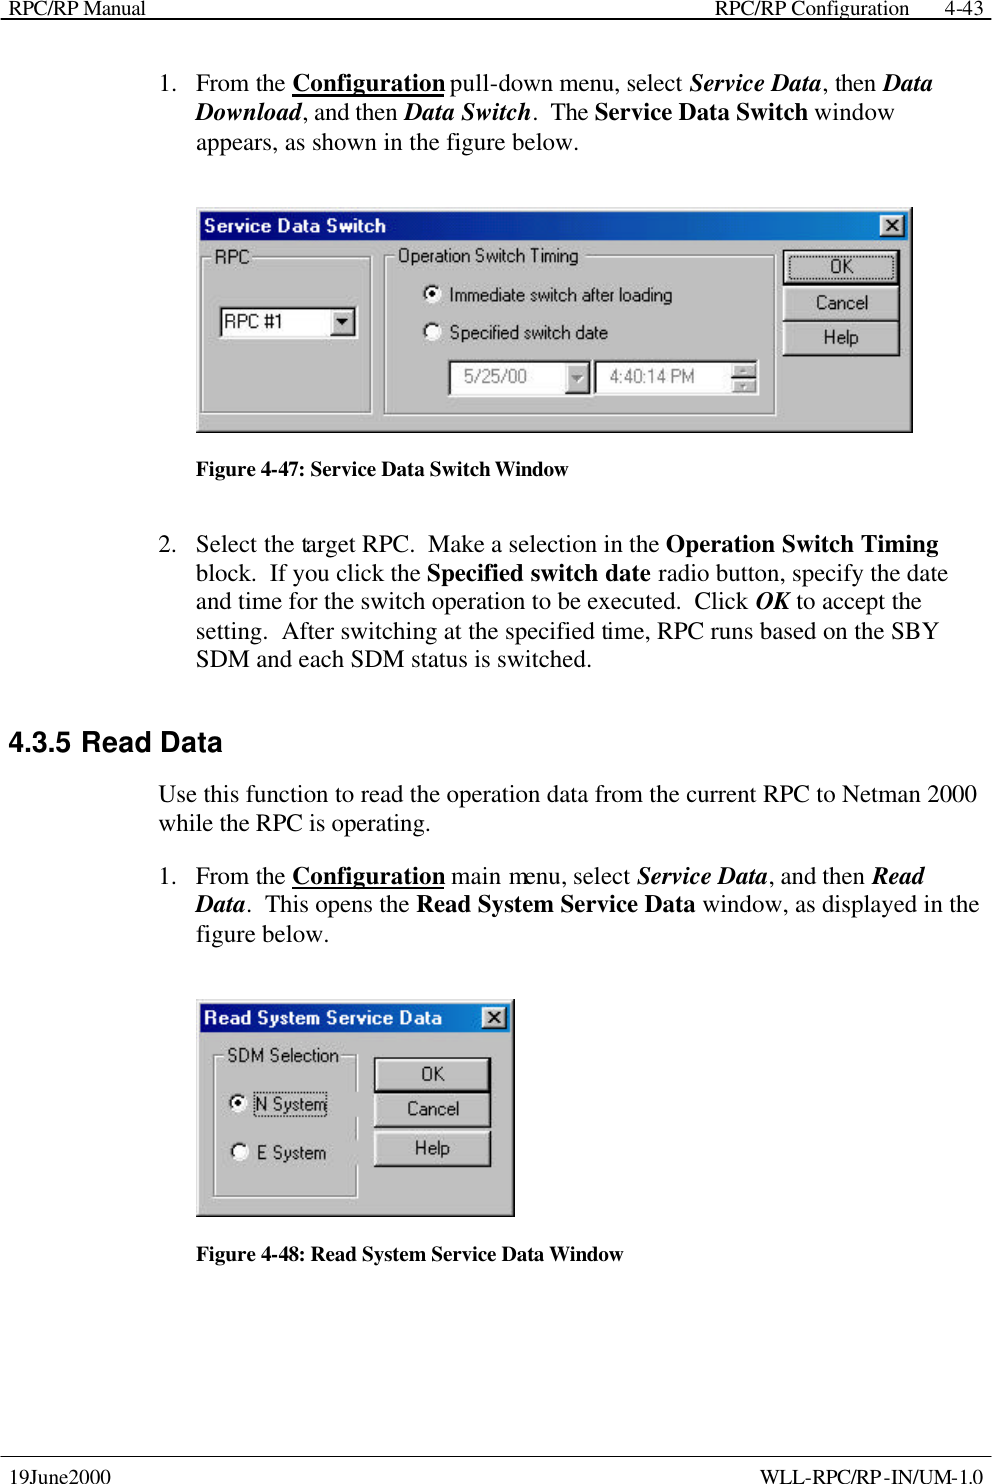 RPC/RP Manual    RPC/RP Configuration 19June2000    WLL-RPC/RP-IN/UM-1.0 4-431.  From the Configuration pull-down menu, select Service Data, then Data Download, and then Data Switch.  The Service Data Switch window appears, as shown in the figure below.    Figure 4-47: Service Data Switch Window 2.  Select the target RPC.  Make a selection in the Operation Switch Timing block.  If you click the Specified switch date radio button, specify the date and time for the switch operation to be executed.  Click OK to accept the setting.  After switching at the specified time, RPC runs based on the SBY SDM and each SDM status is switched. 4.3.5 Read Data Use this function to read the operation data from the current RPC to Netman 2000 while the RPC is operating. 1.  From the Configuration main menu, select Service Data, and then Read Data.  This opens the Read System Service Data window, as displayed in the figure below.    Figure 4-48: Read System Service Data Window 